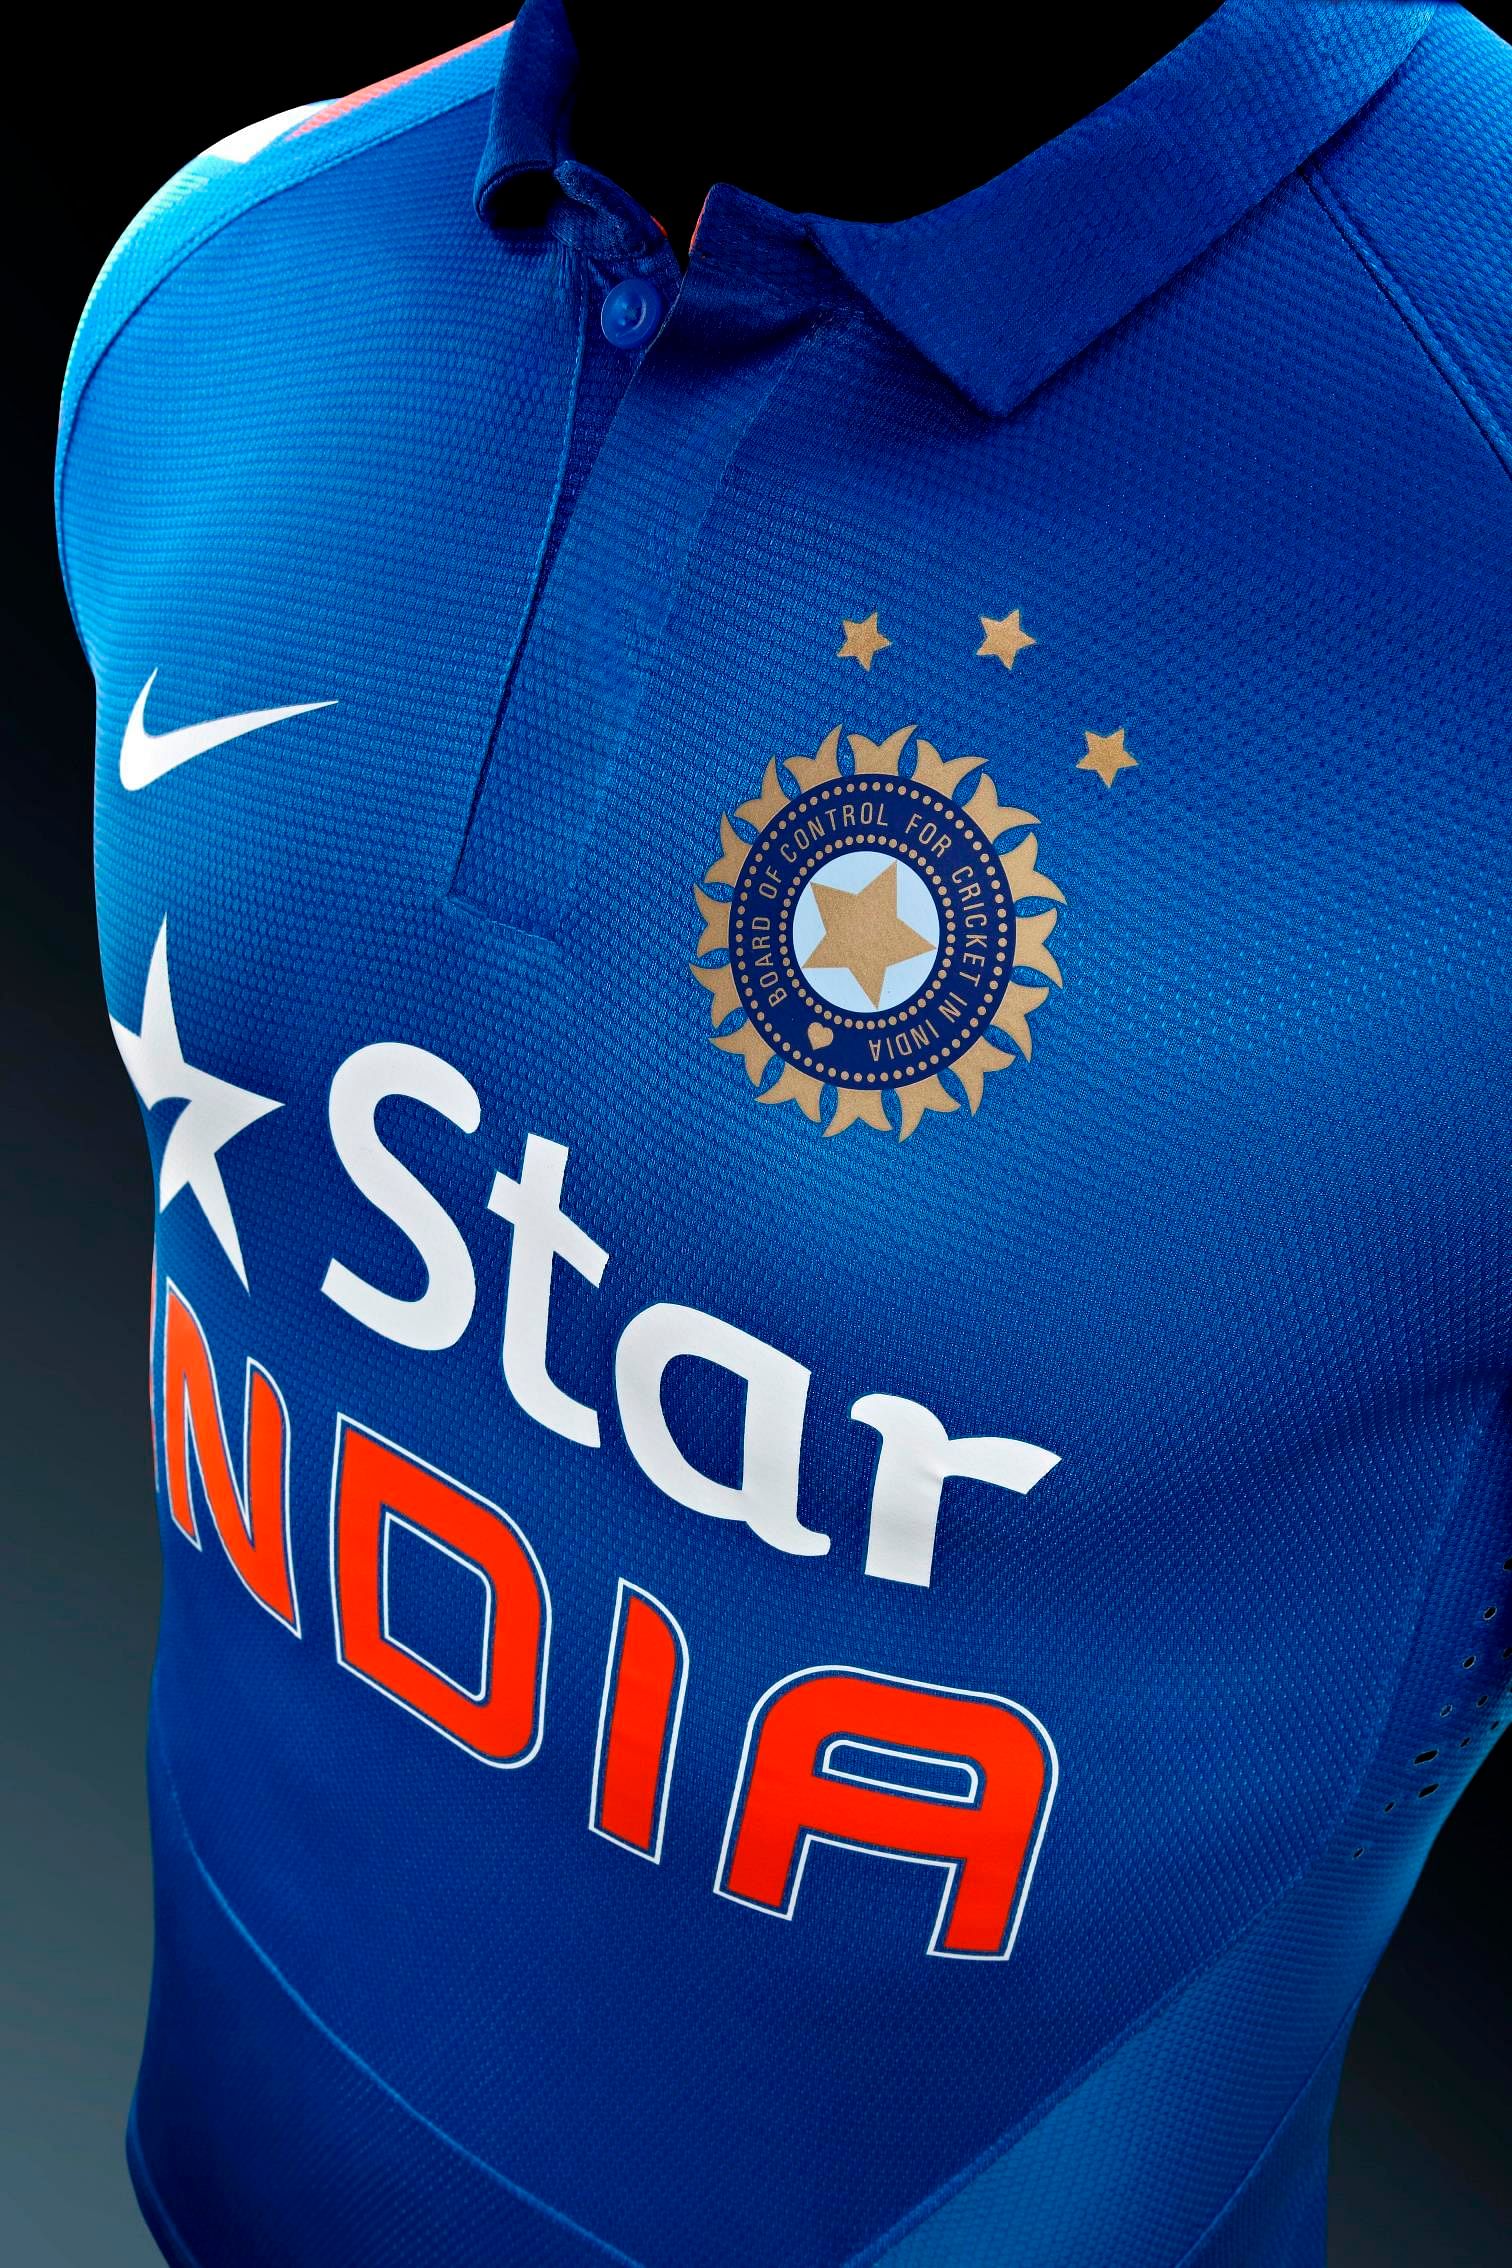 Nike Cricket unveils new Team India Jersey1512 x 2268